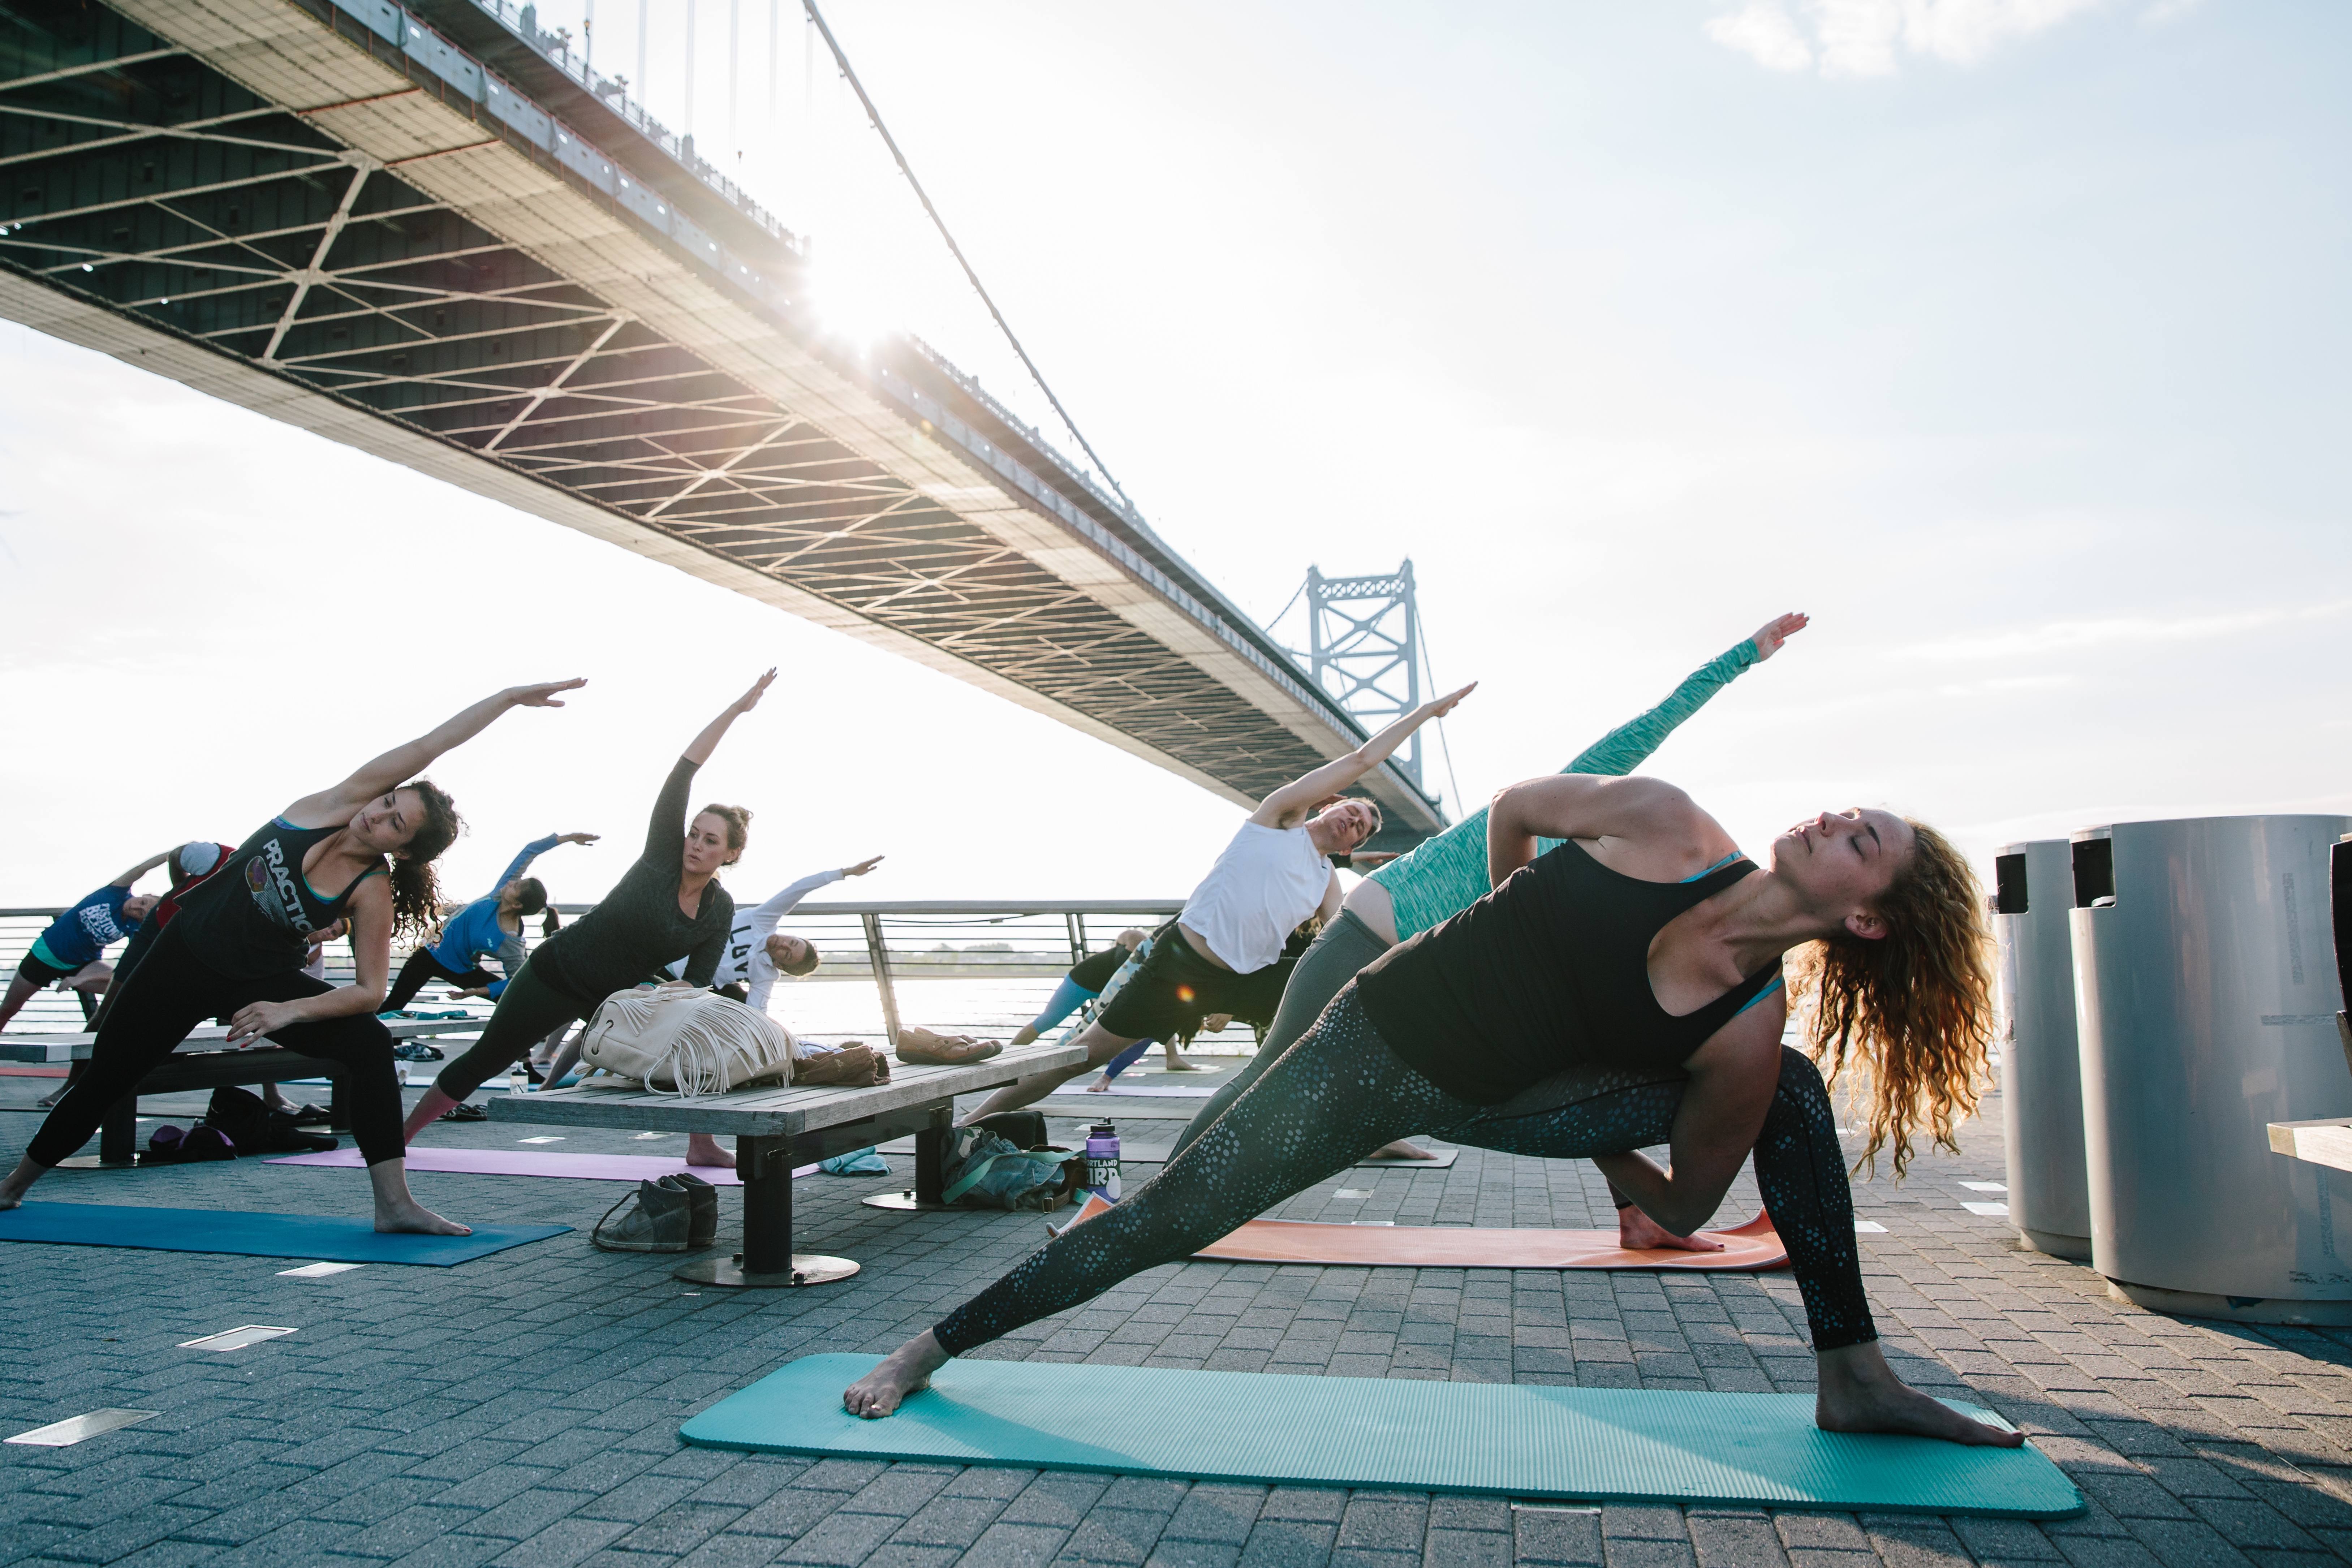 https://www.phillymag.com/wp-content/uploads/sites/3/2019/04/yoga-on-the-pier-main.jpg